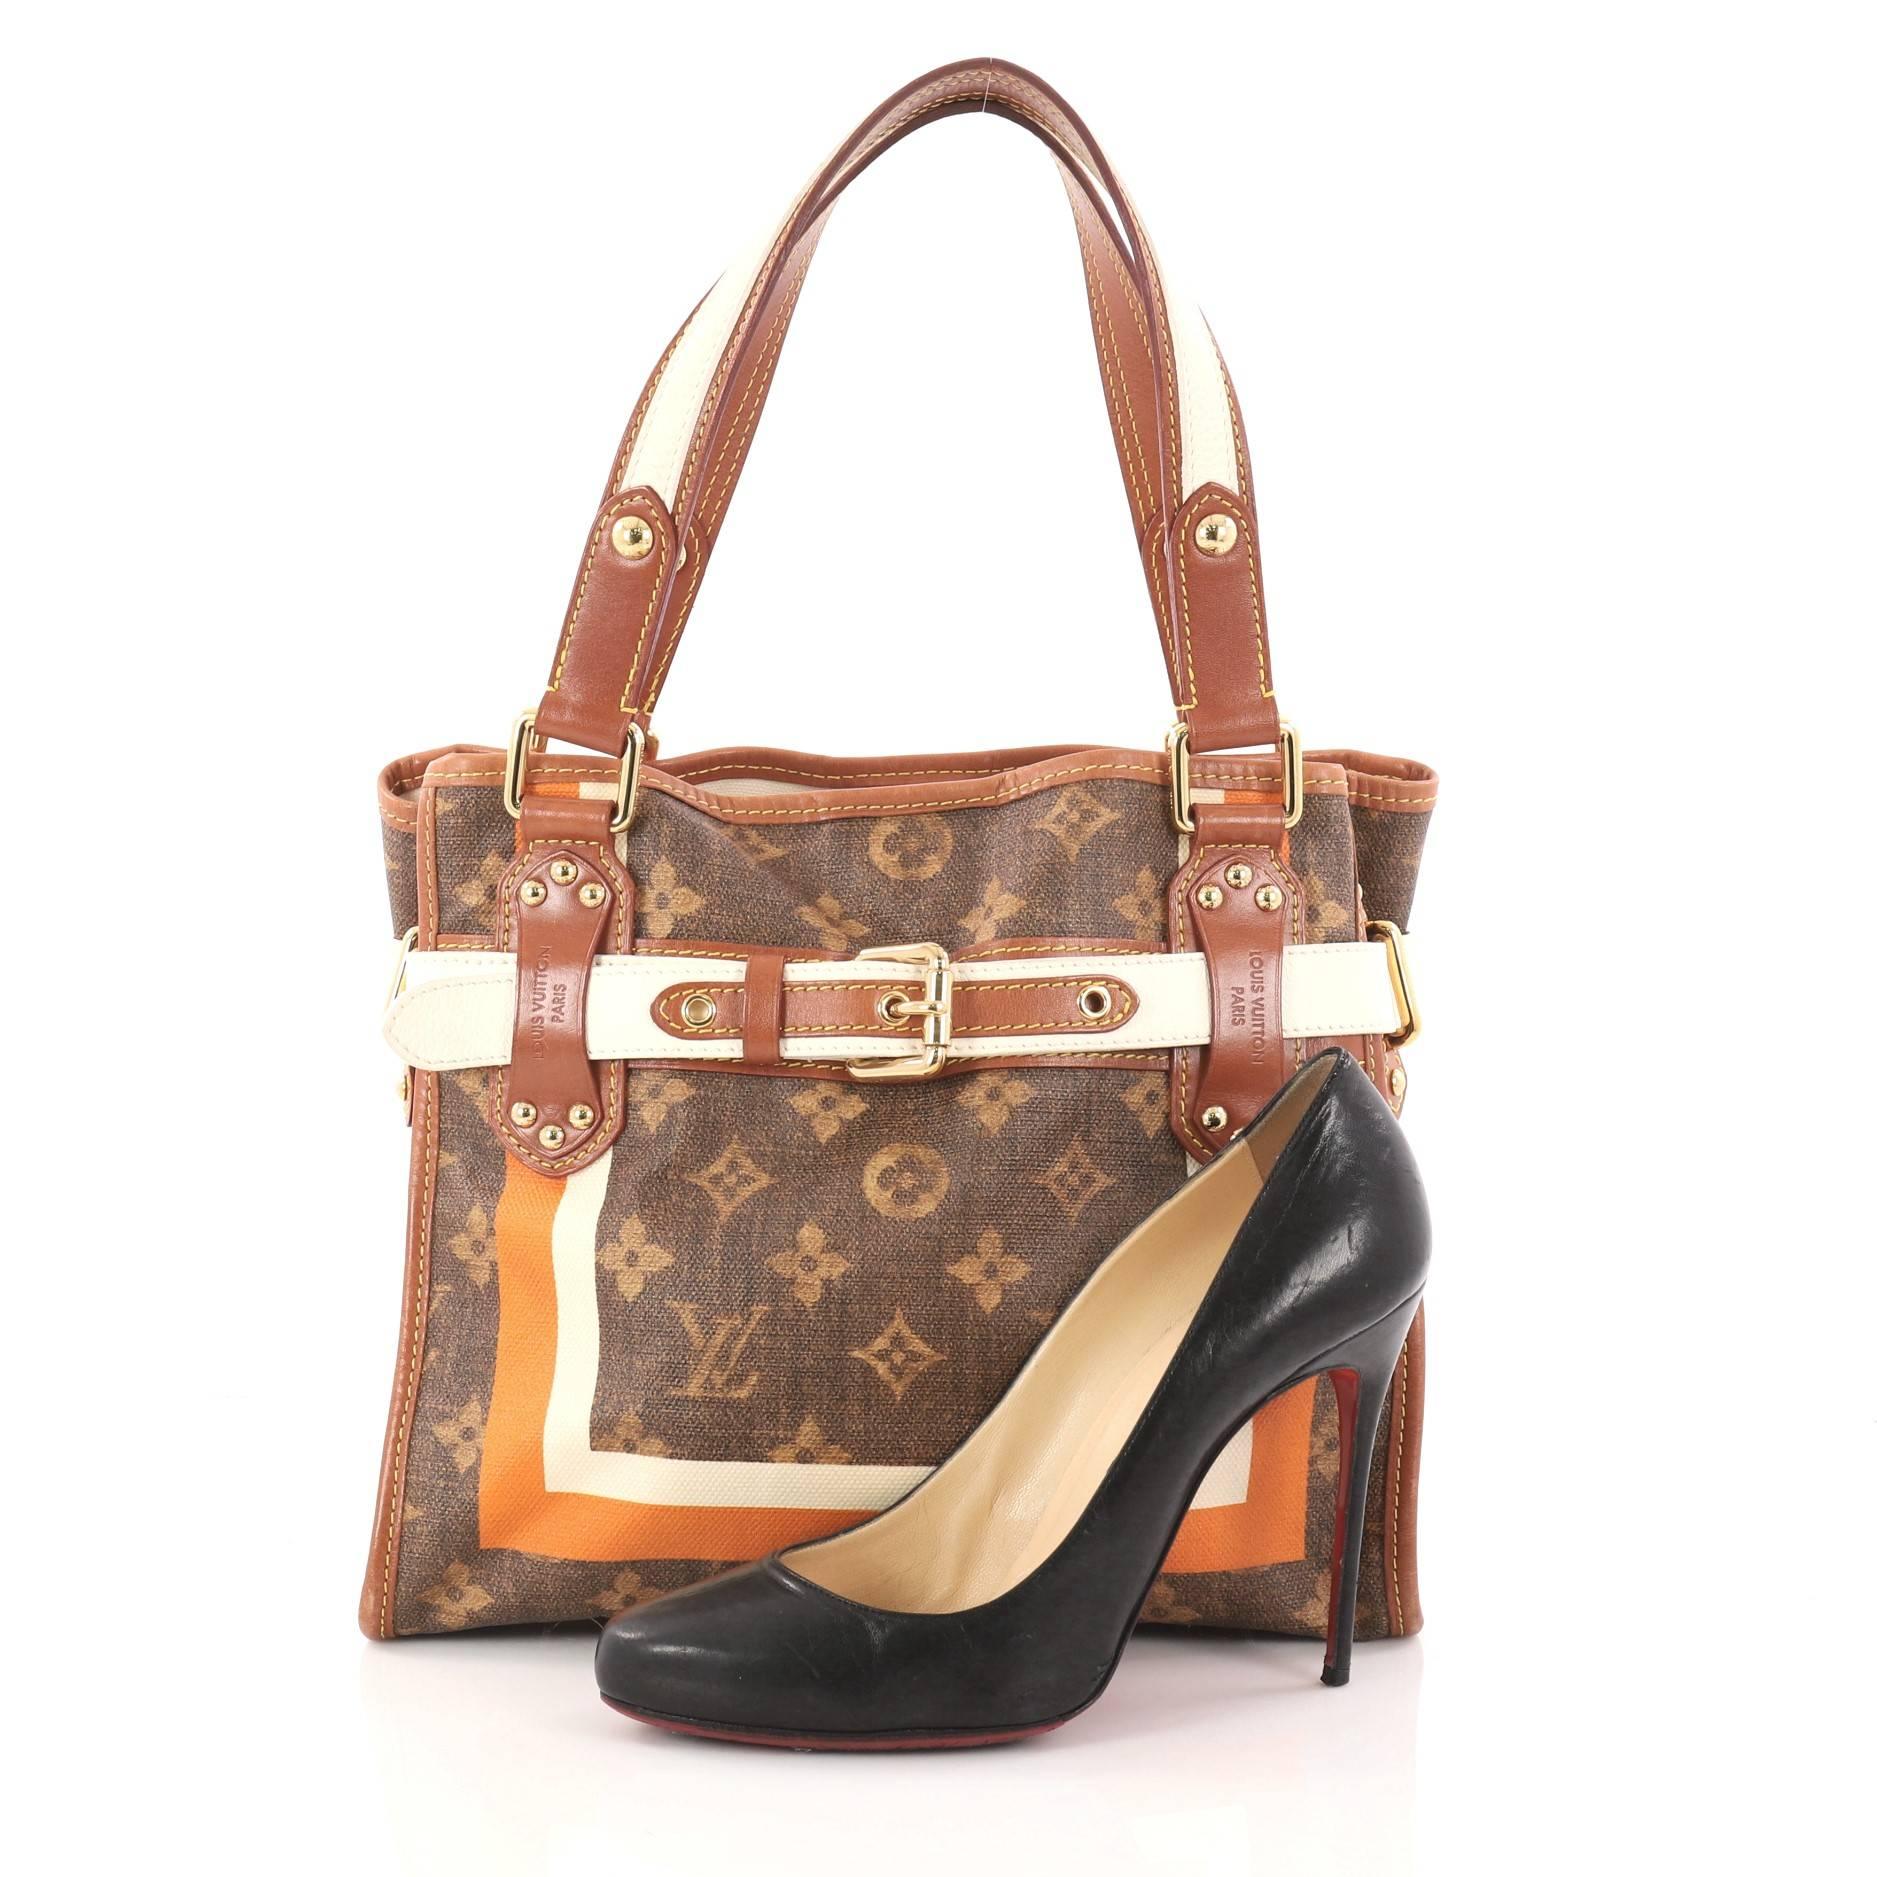 This authentic Louis Vuitton Tisse Sac Handbag Limited Edition Monogram Canvas Rayures PM is perfect for your daily excursions. Crafted with limited edition monogram coated canvas with brown leather trims, this stand-out bag features dual flat